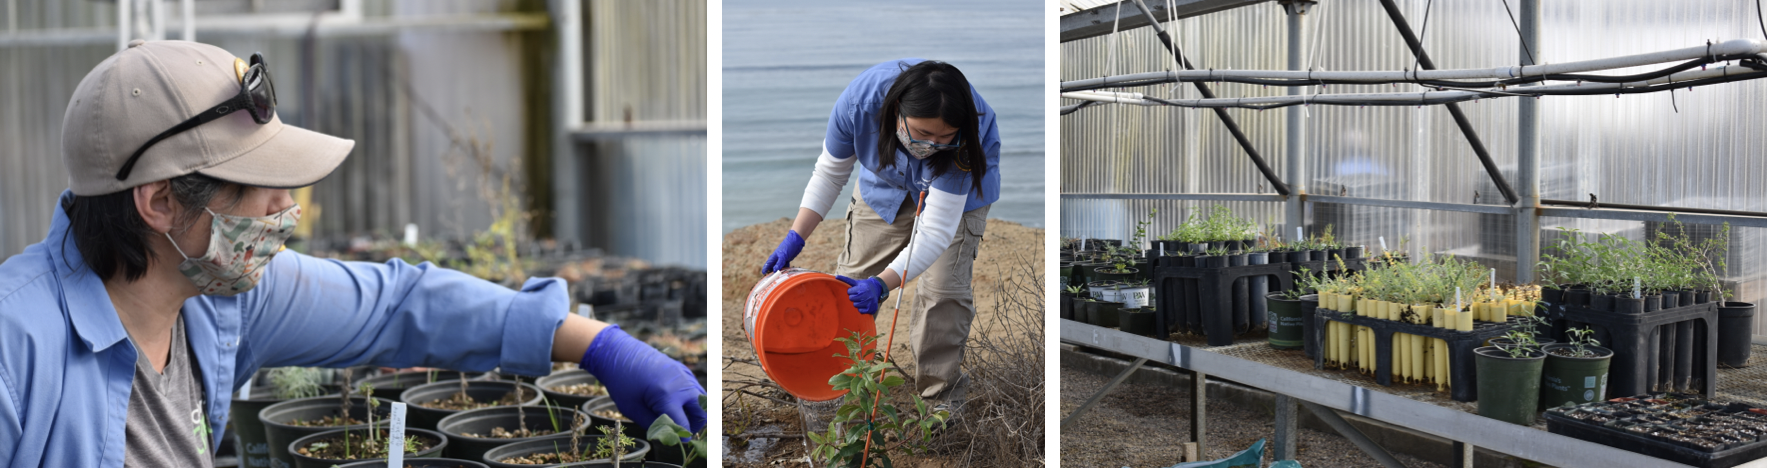 A volunteer in baseball cap, mask and blue shirt, a volunteer watering plants and plants in pots in a greenhouse